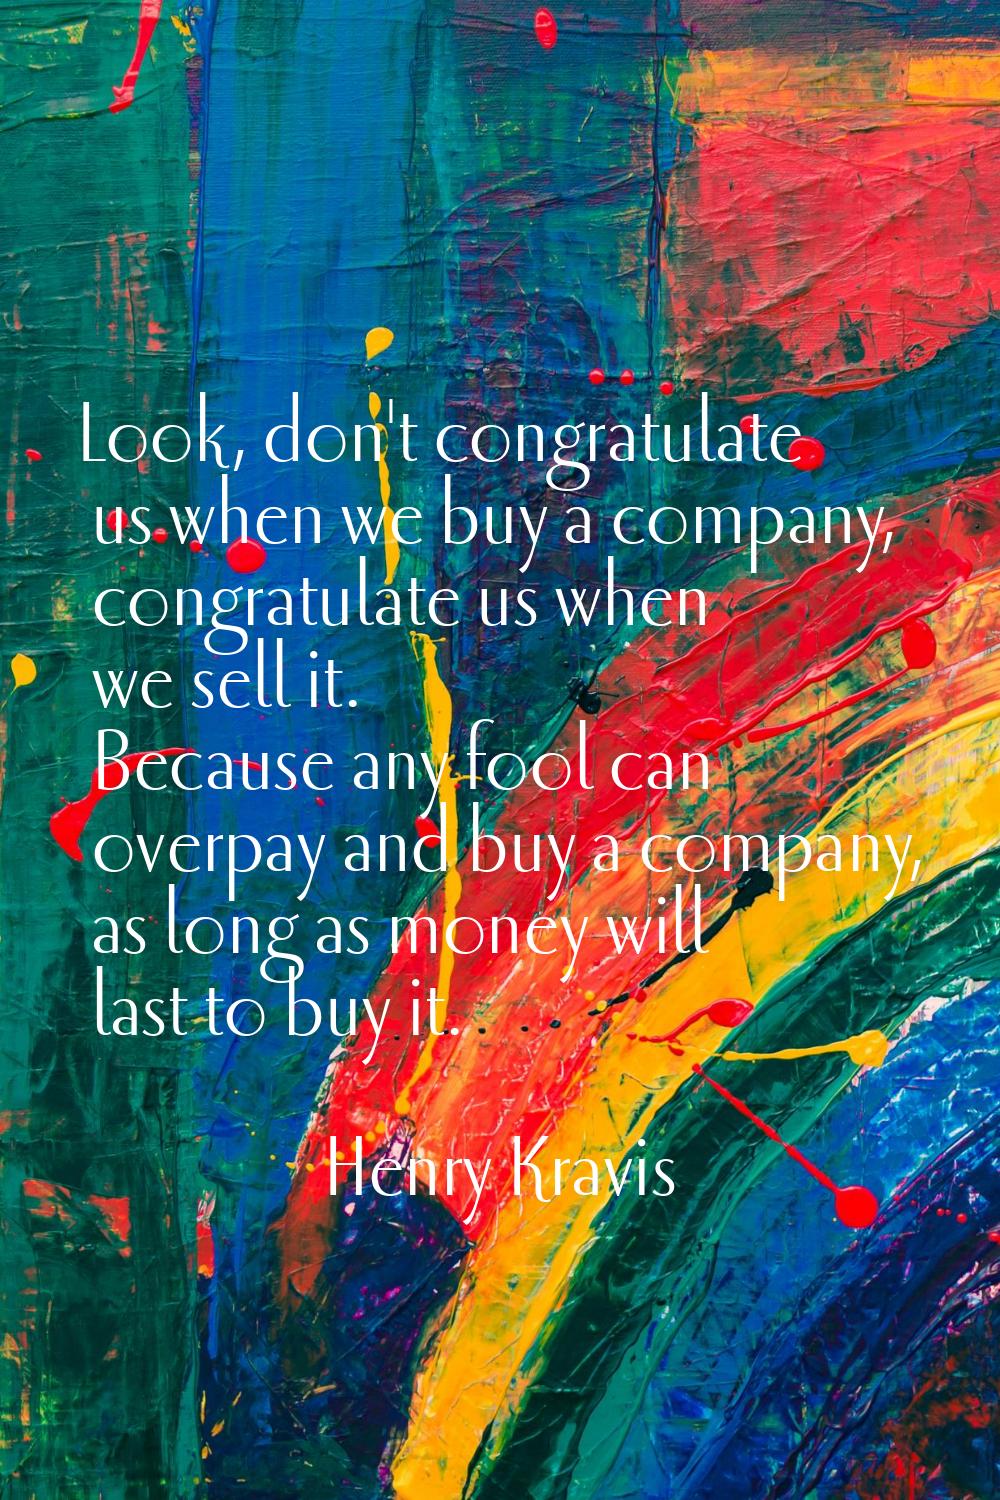 Look, don't congratulate us when we buy a company, congratulate us when we sell it. Because any foo